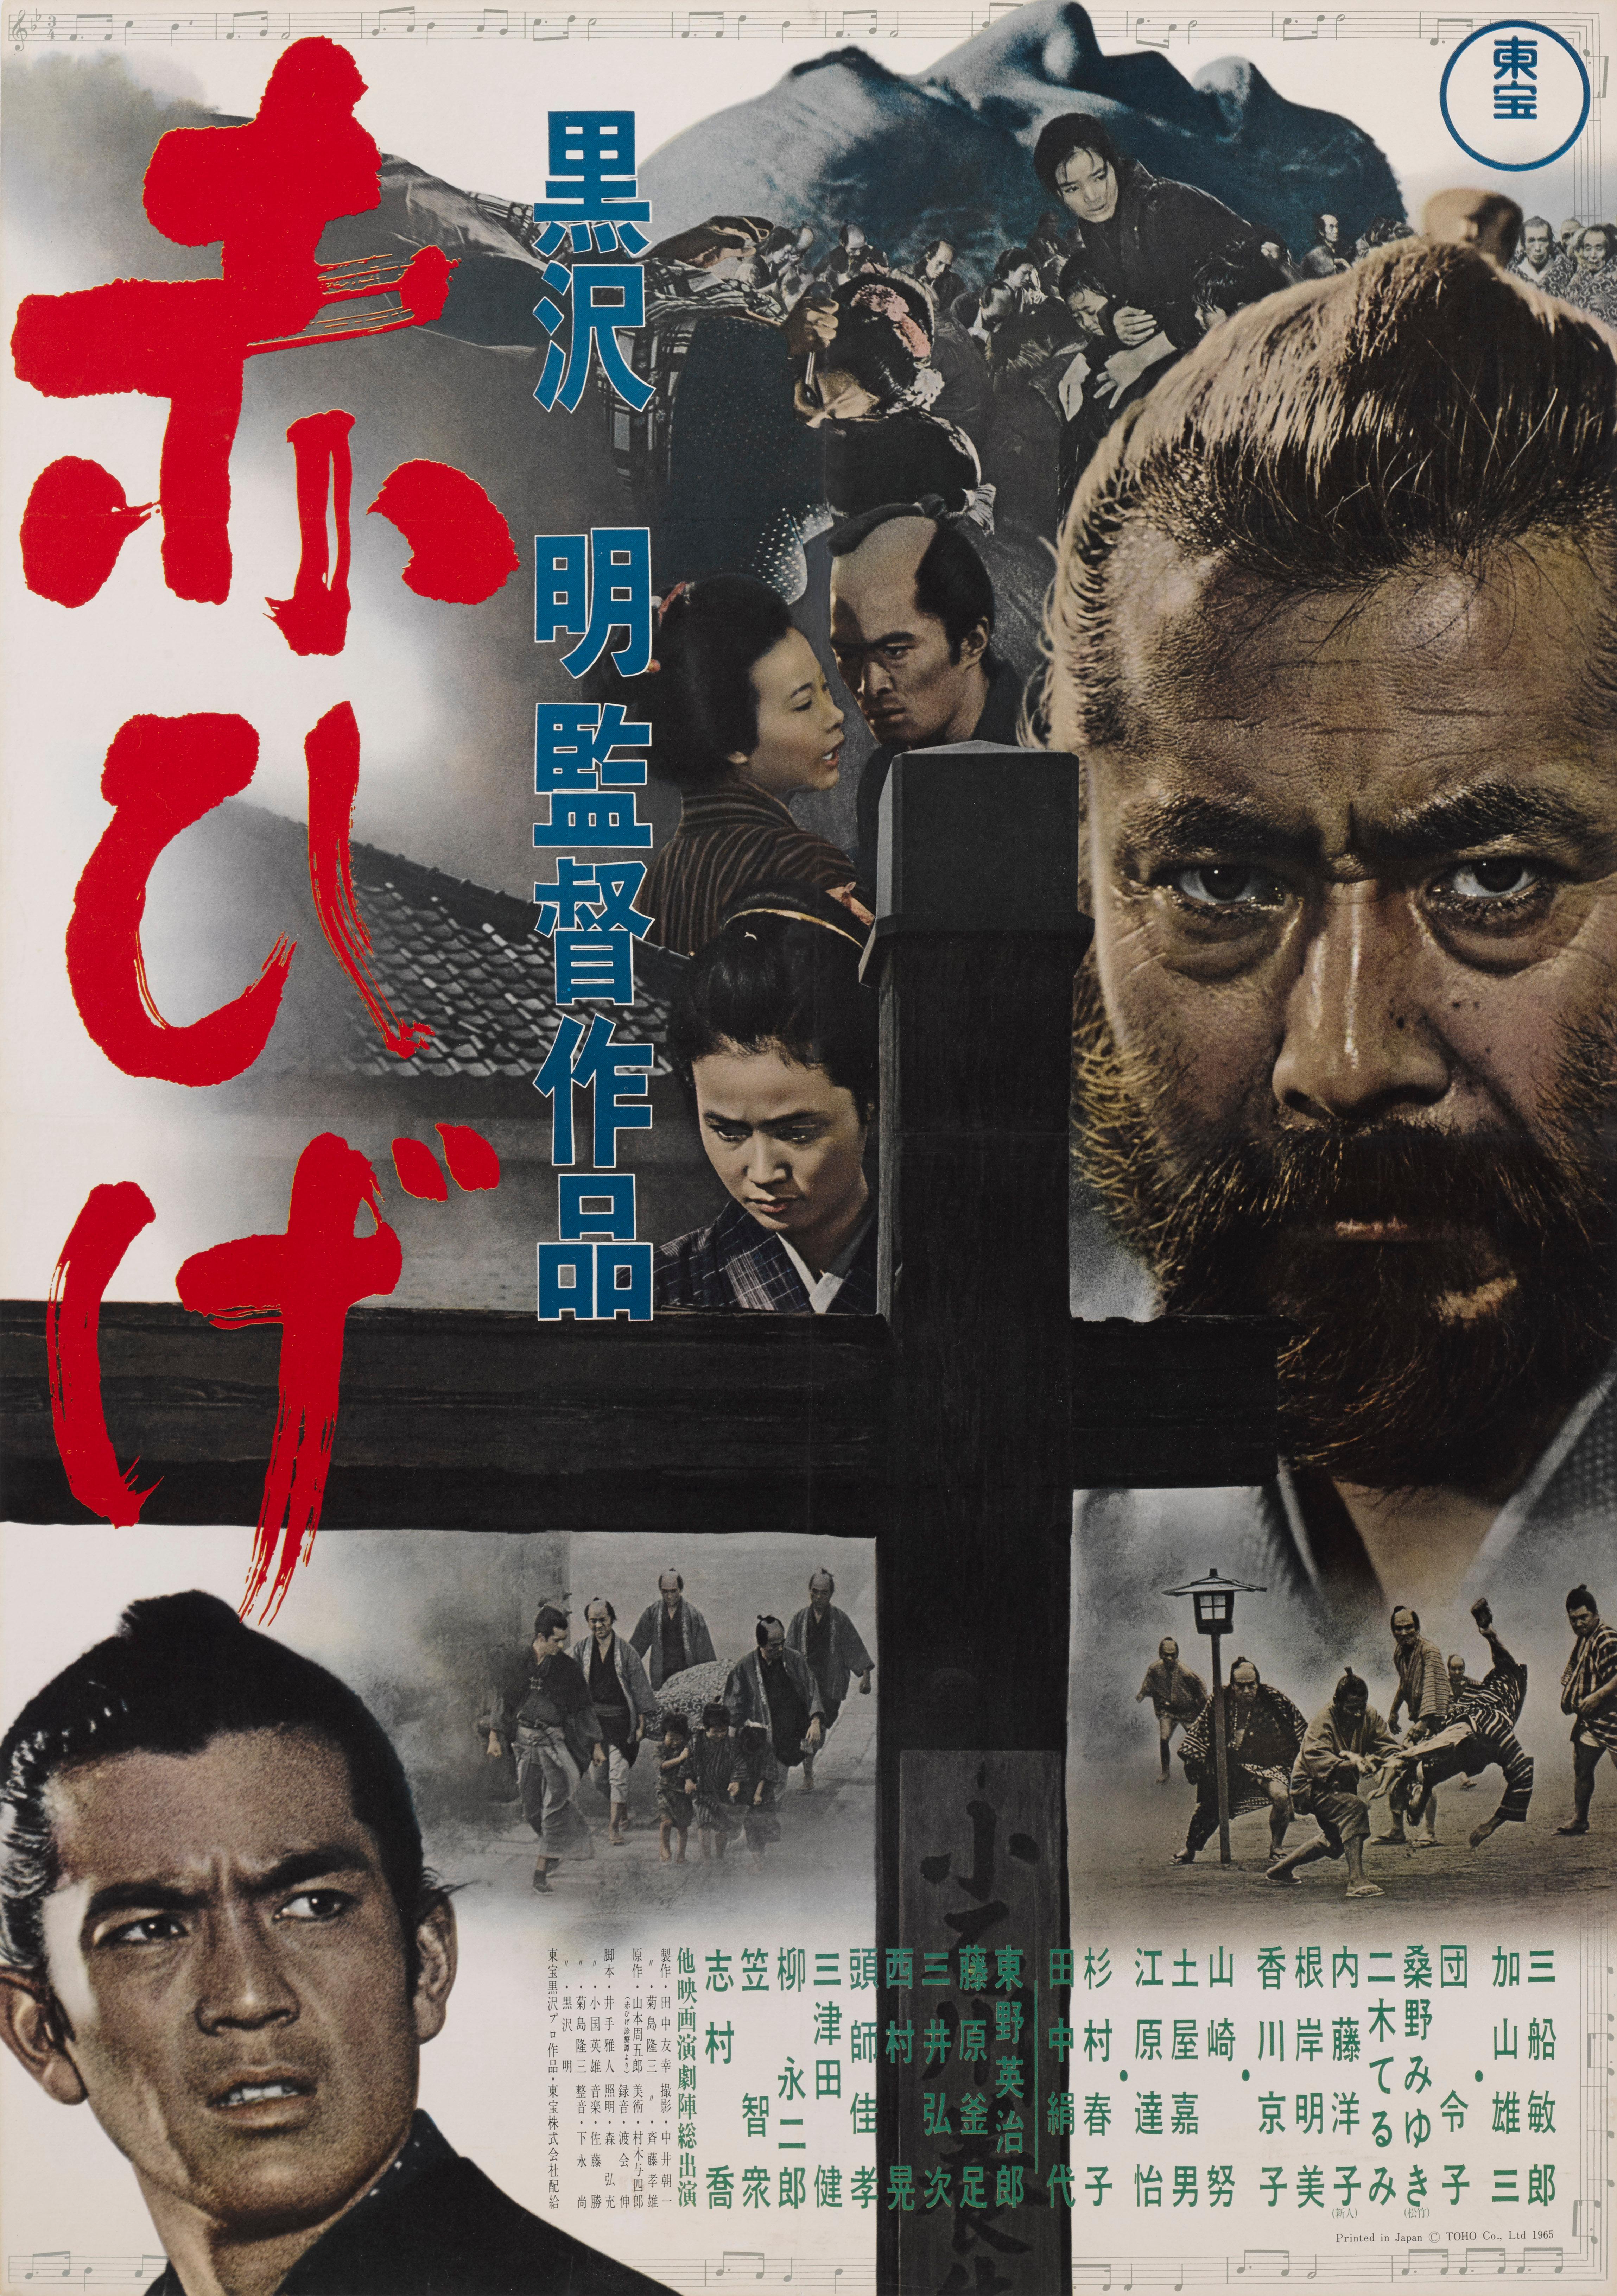 Original Japanese film poster the 1965 Drama.
This poster would have been used outside the cinema at the films original release.
This film was directed Akira Kurosawa and starred Toshirô Mifune
This poster has been conservation linen backed. And